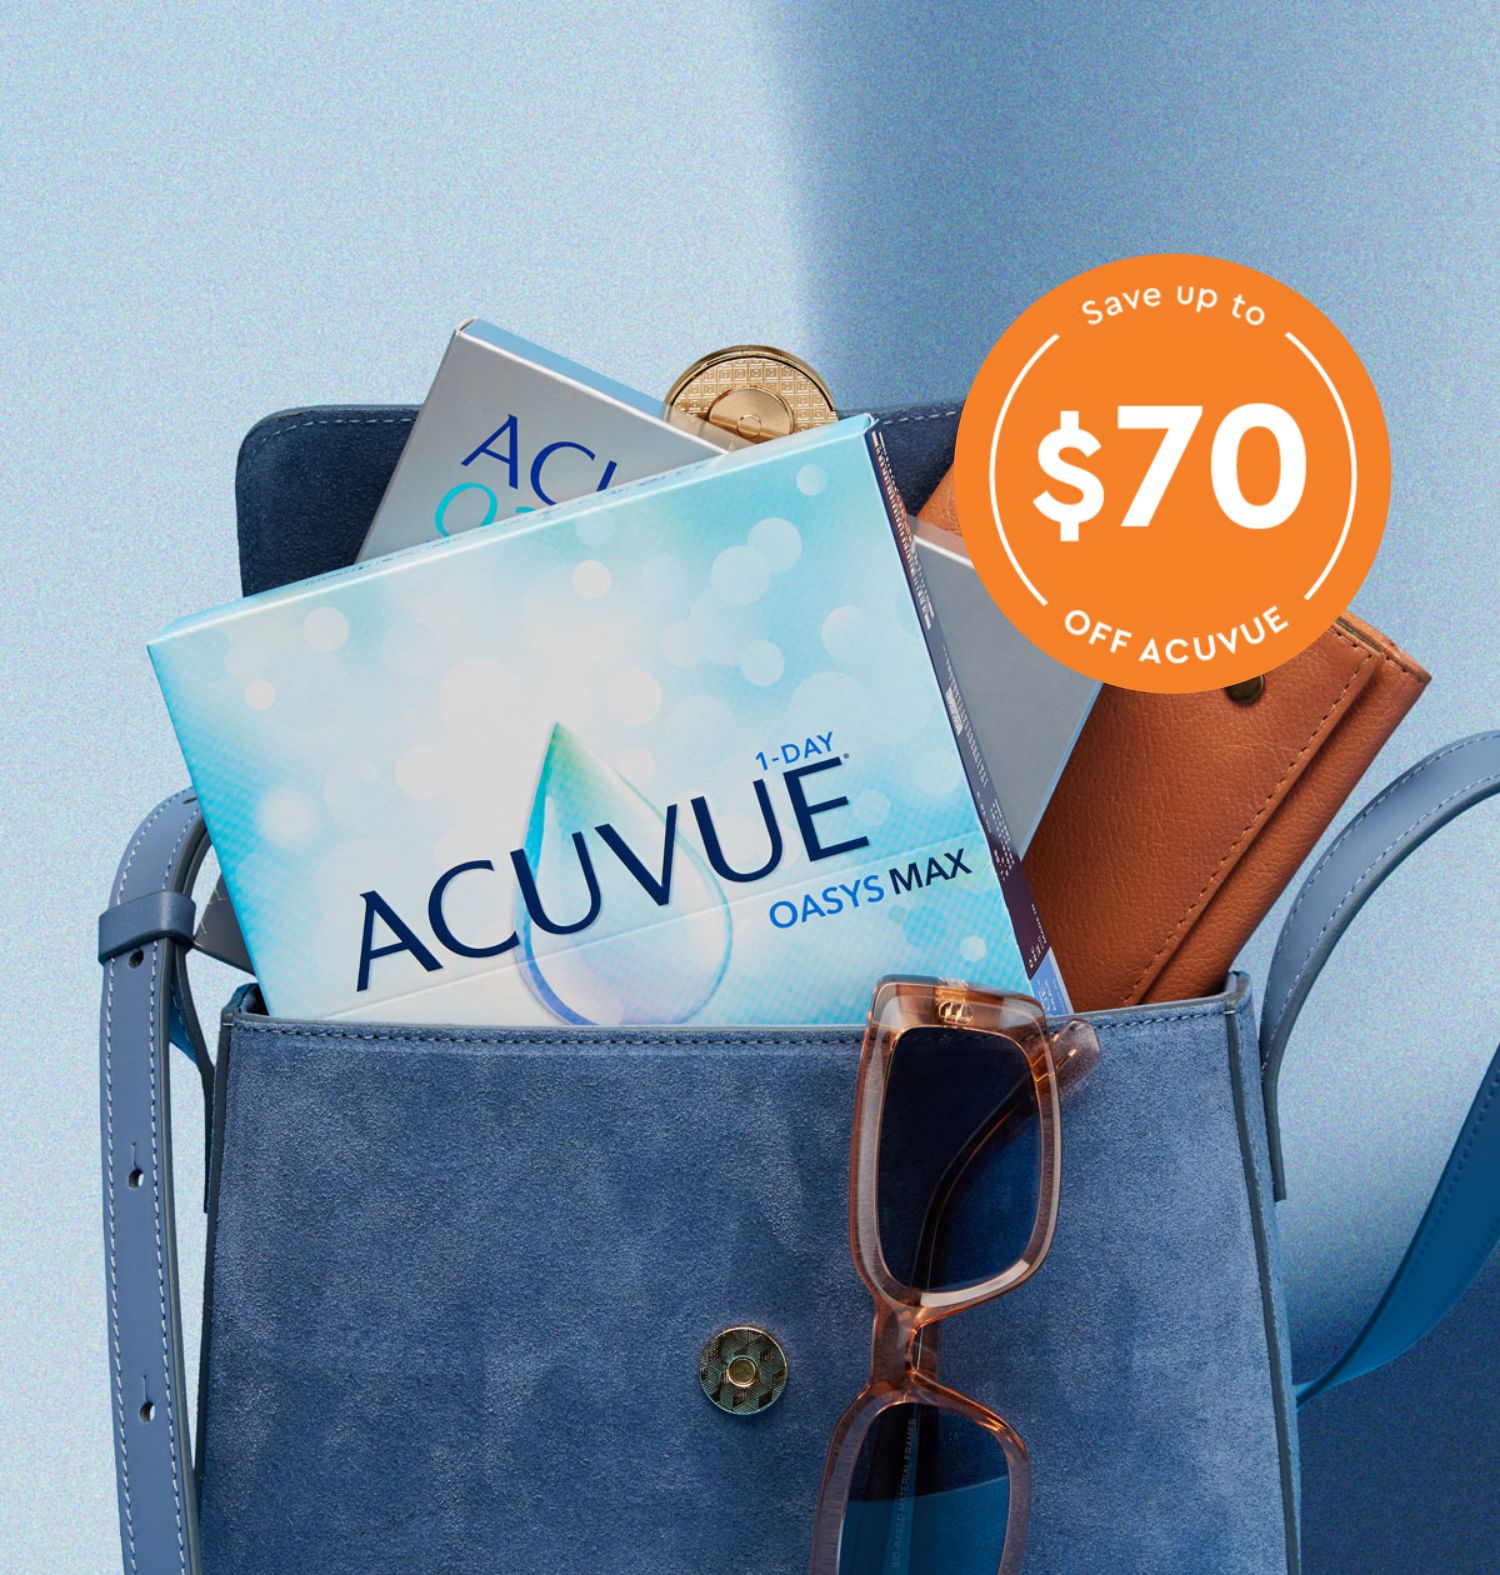 Promotional image featuring ACUVUE contact lens boxes in a handbag with an eyeglass and a discount offer.